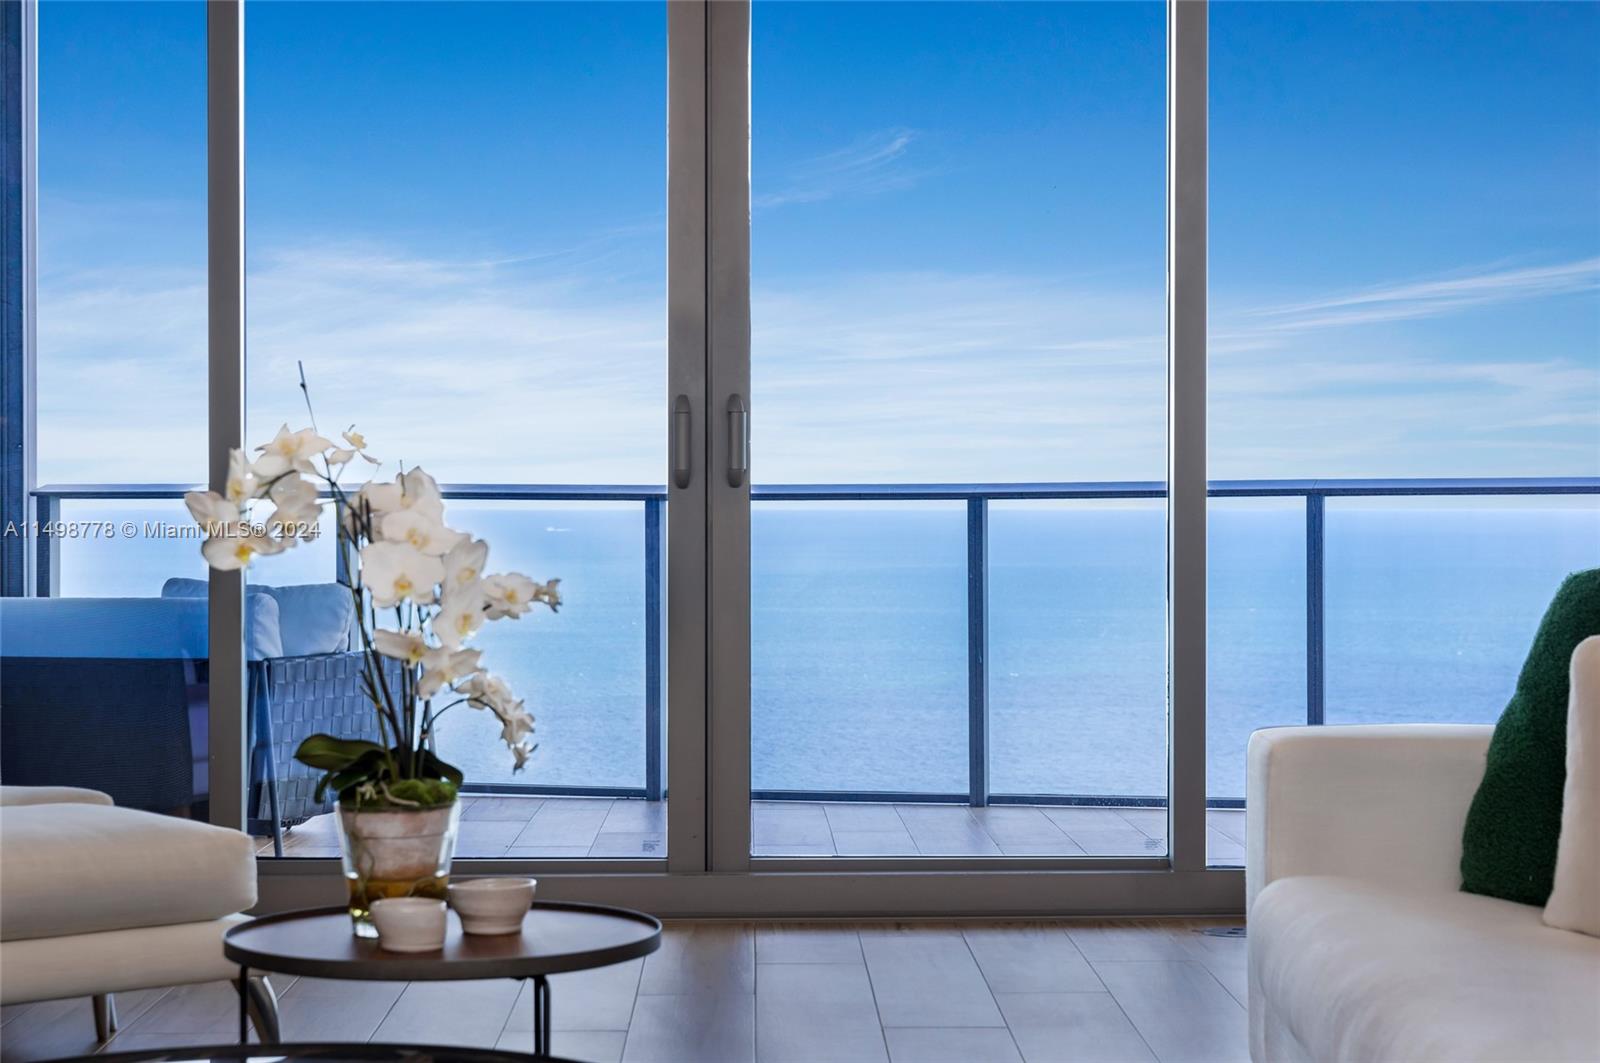 New price. Best 2 bed floorpan in the Ritz Carlton in Collins Av. nestled within the prestigious enclave of Sunny Isles Beach. This sophisticated and meticulously designed unit epitomizes luxury living, offering a fusion of elegance and breathtaking ocean views. Best 2 bedrooms floorplan. Residents of this prestigious building enjoy access to an array of world-class amenities, including a state-of-the-art fitness center, a resort-style swimming pool, a spa, 24-hour concierge services, valet parking, and a private beach club. With this prime location you'll have easy access to pristine beaches, fine dining establishments, high-end shopping boutiques, and vibrant entertainment options. 10' ceilings, top of the line appliances, oversized terrace and more.